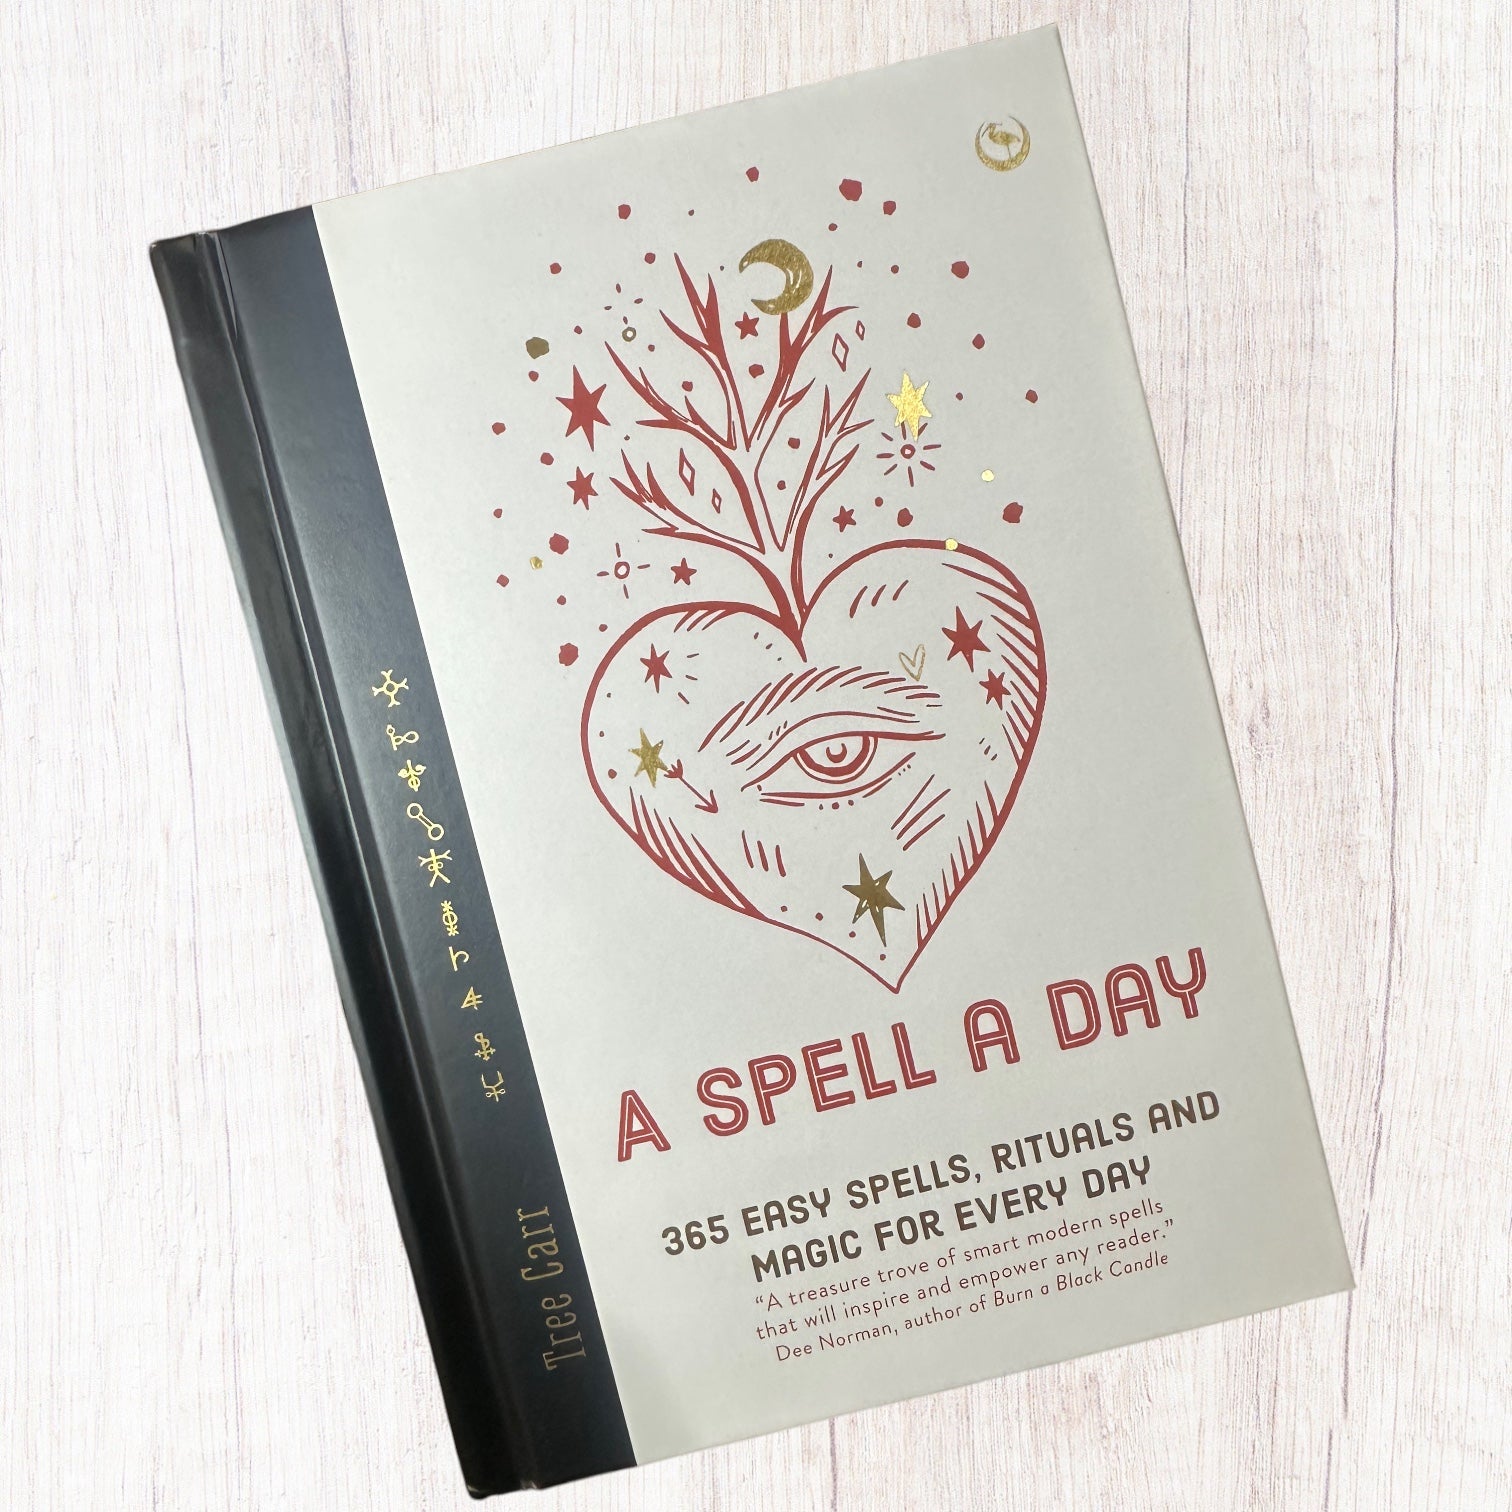 A Spell A Day: 365 Easy Spells, Rituals & Magic For Every Day